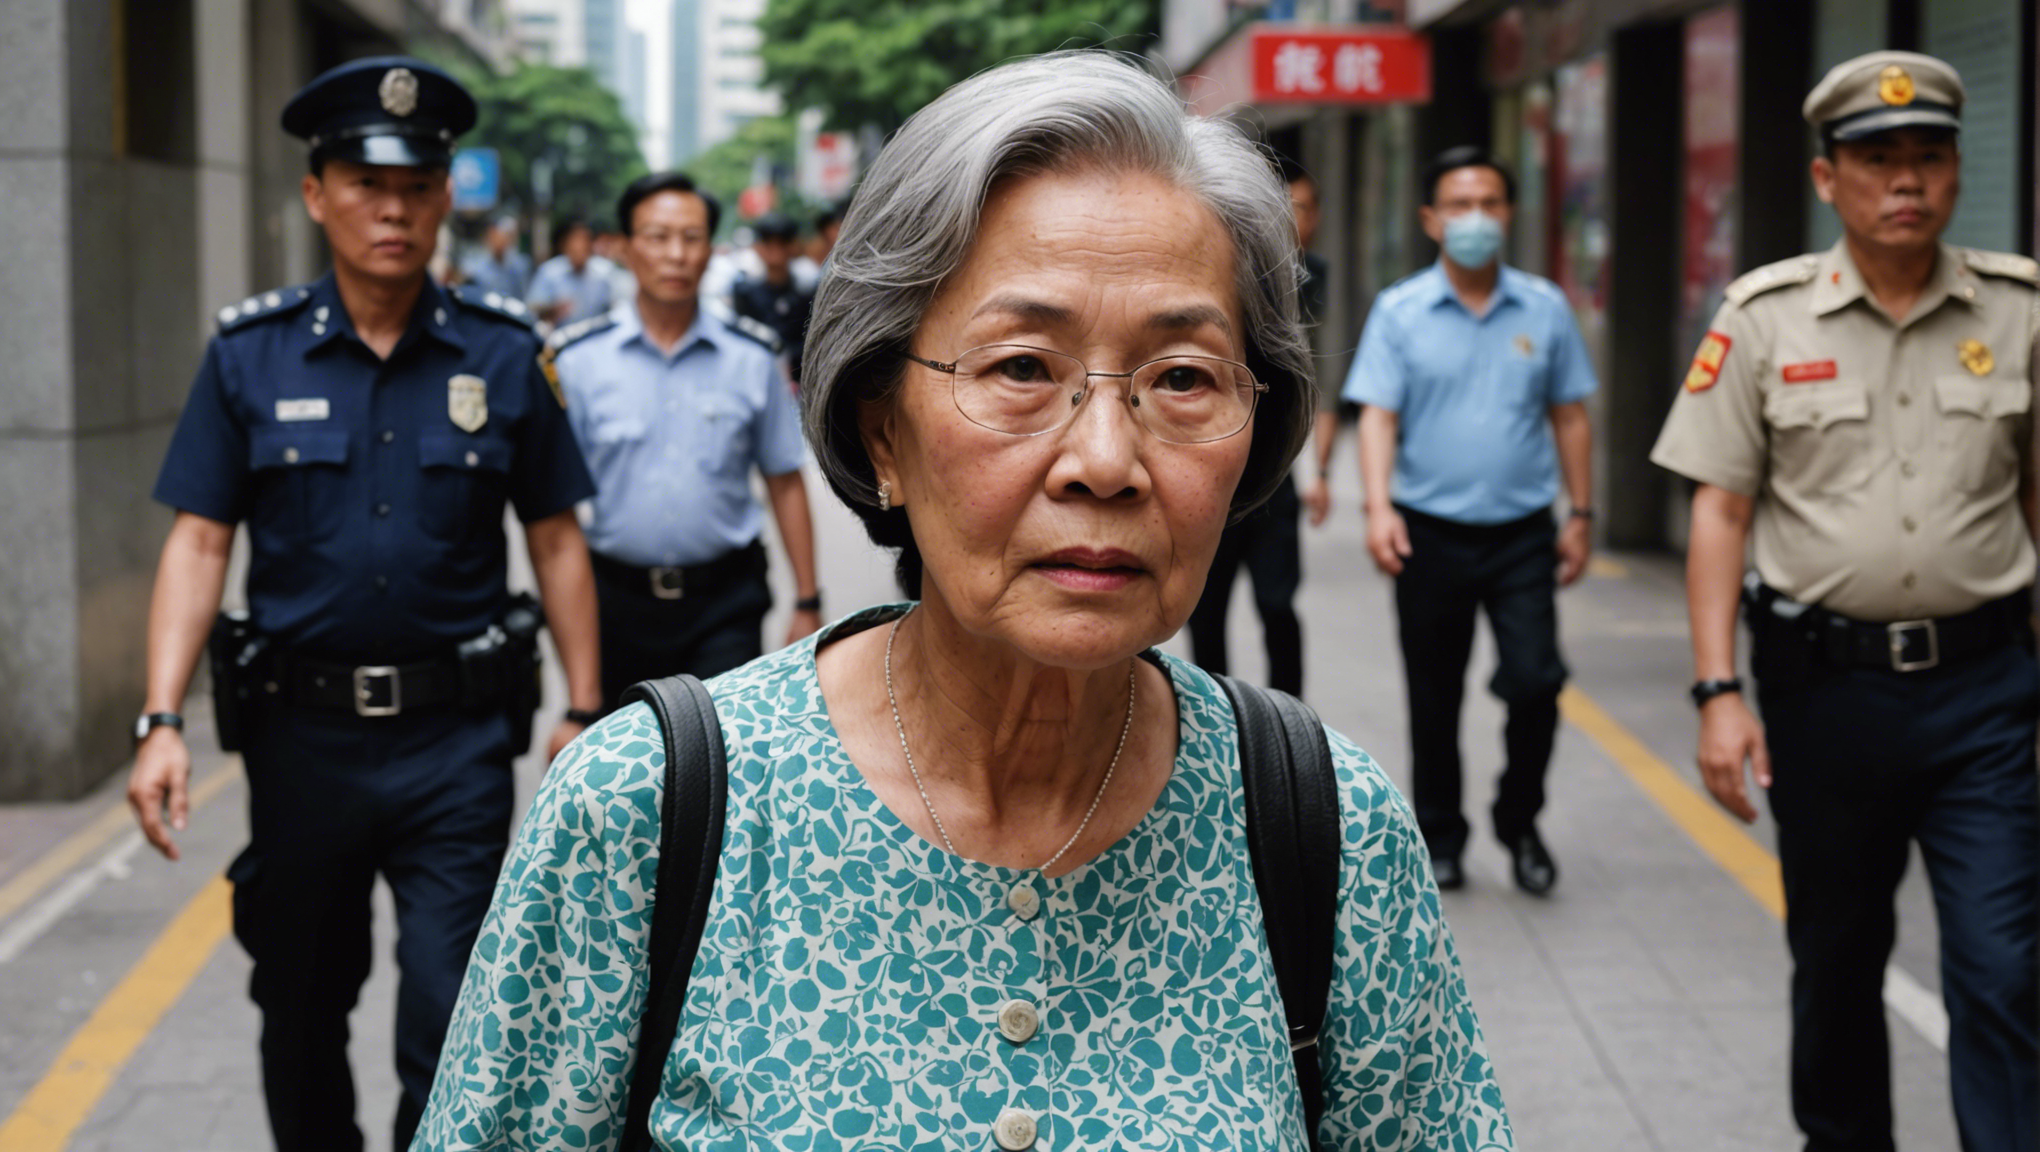 read about the case of a 70-year-old hong kong woman who allegedly fell victim to a phone scam, resulting in a loss of hk$258 million. 10 suspects have been arrested in connection to the incident.